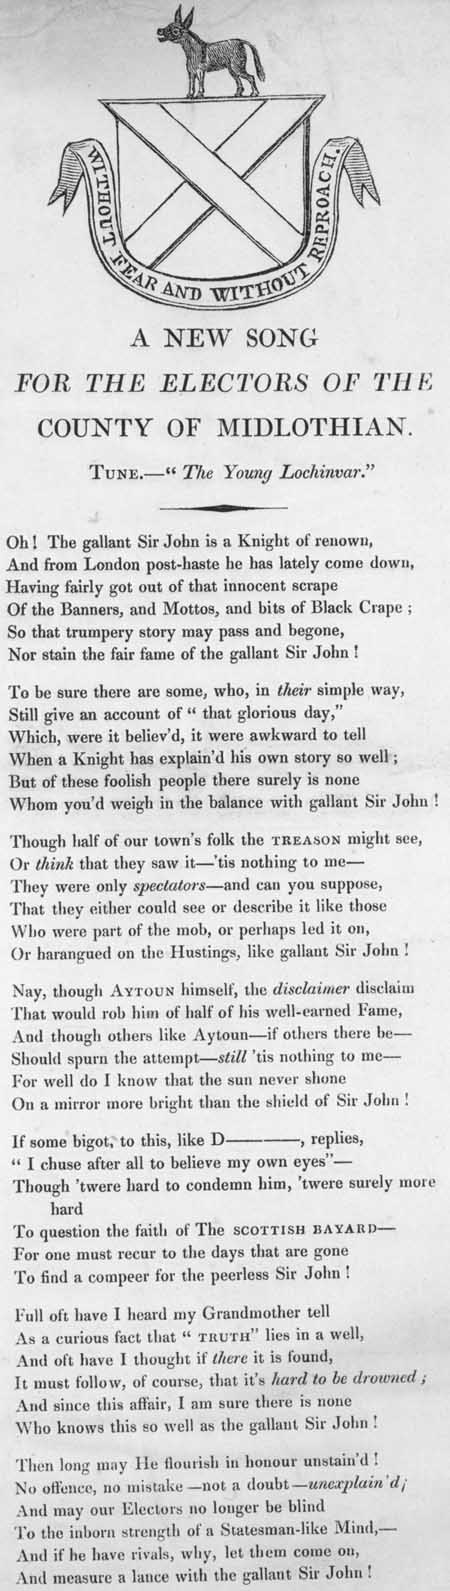 Broadside ballad entitled 'A New Song for the Electors of the County of Midlothian'